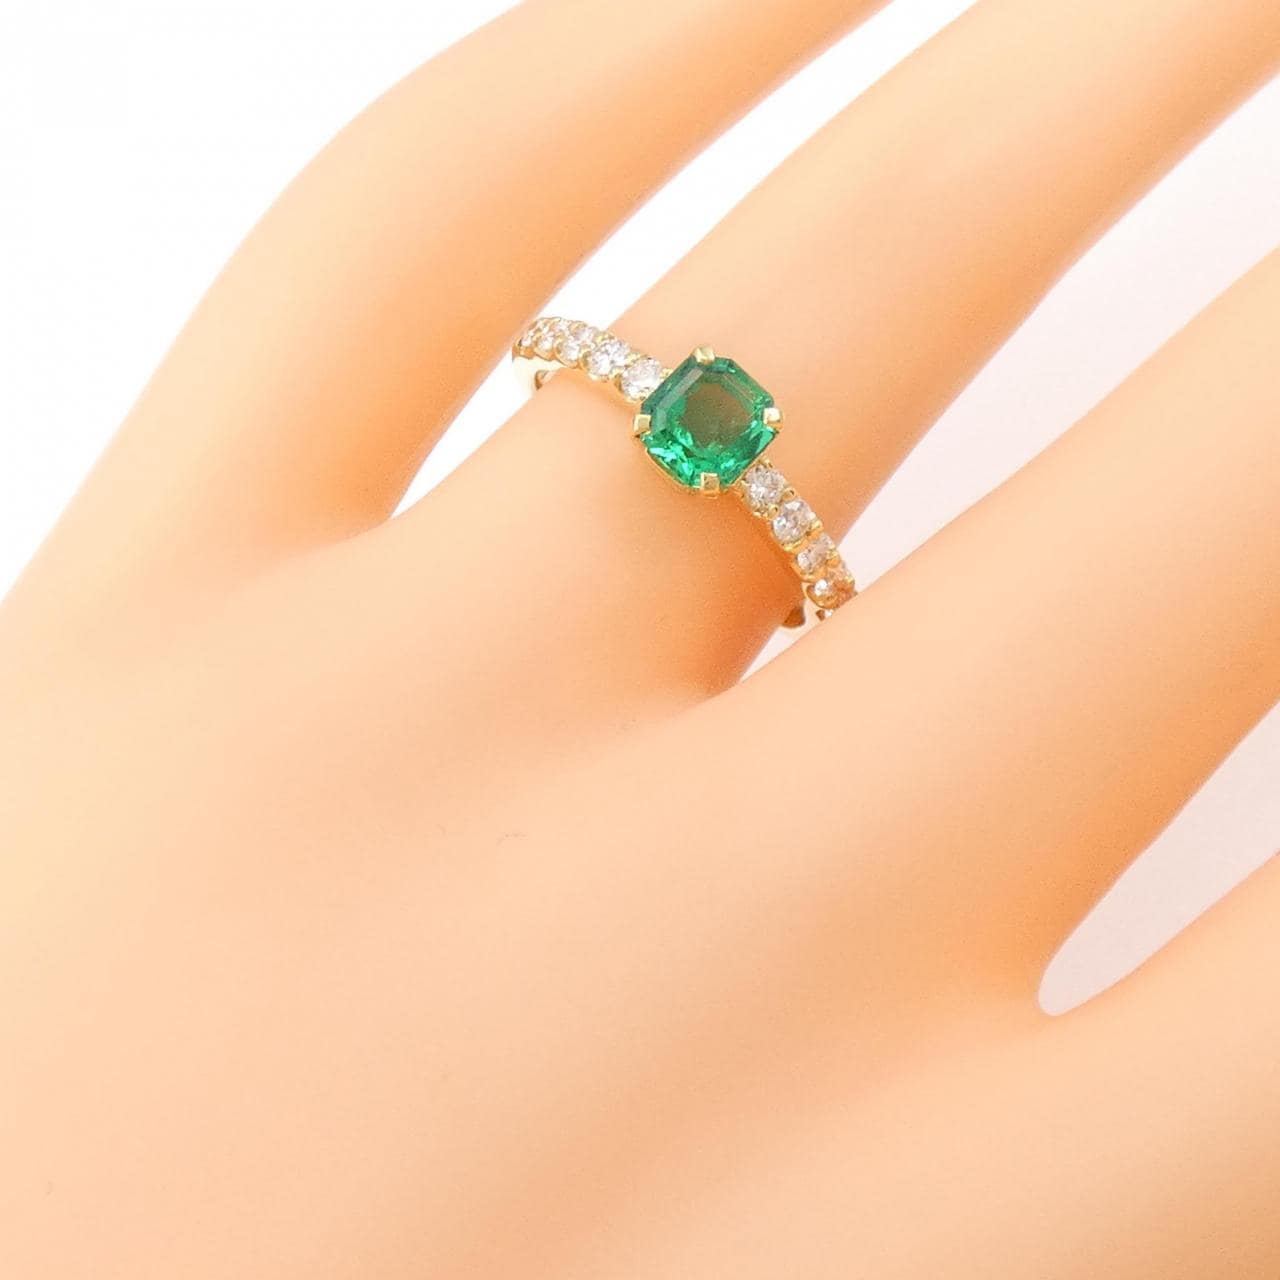 [Remake] K18YG emerald ring 0.65CT Made in Colombia